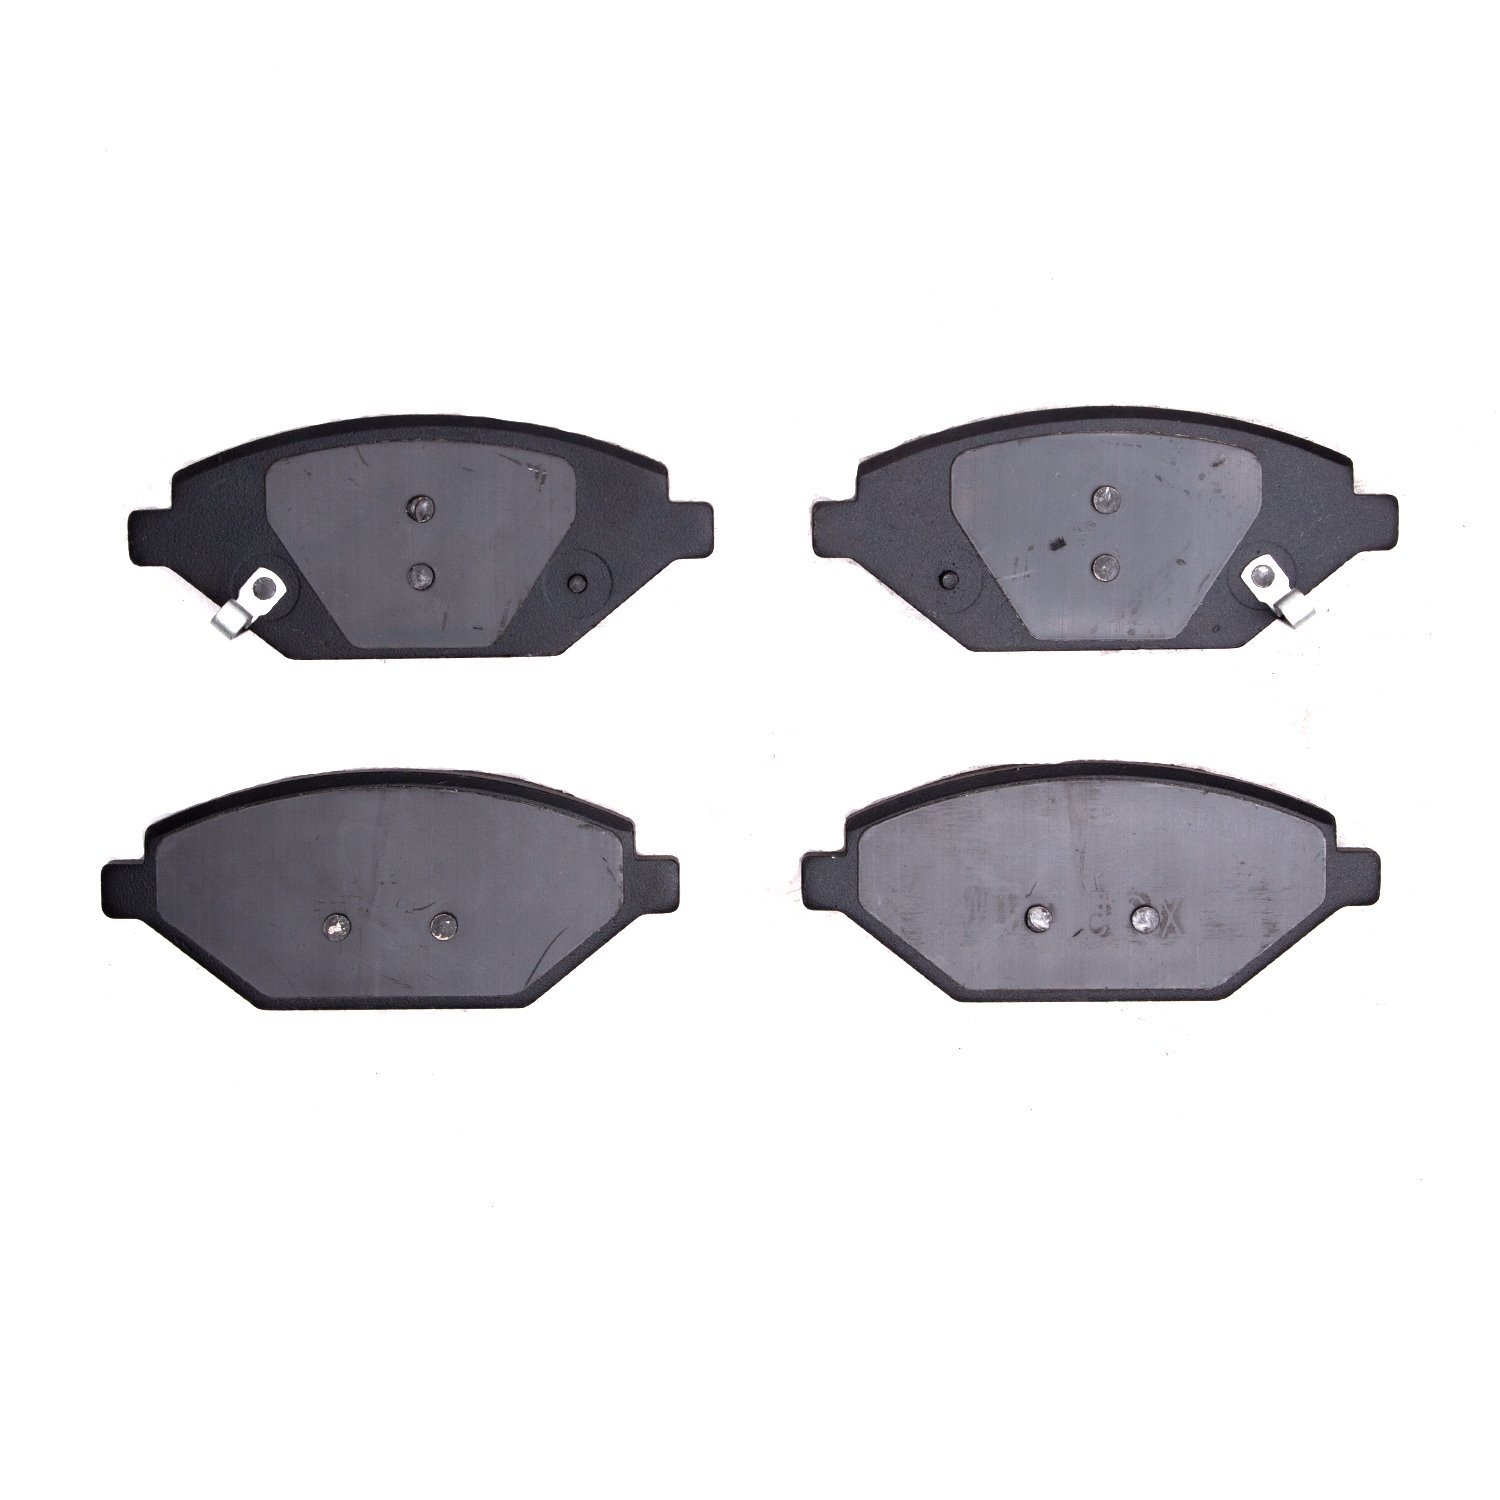 1551-1864-00 5000 Advanced Ceramic Brake Pads, Fits Select GM, Position: Front